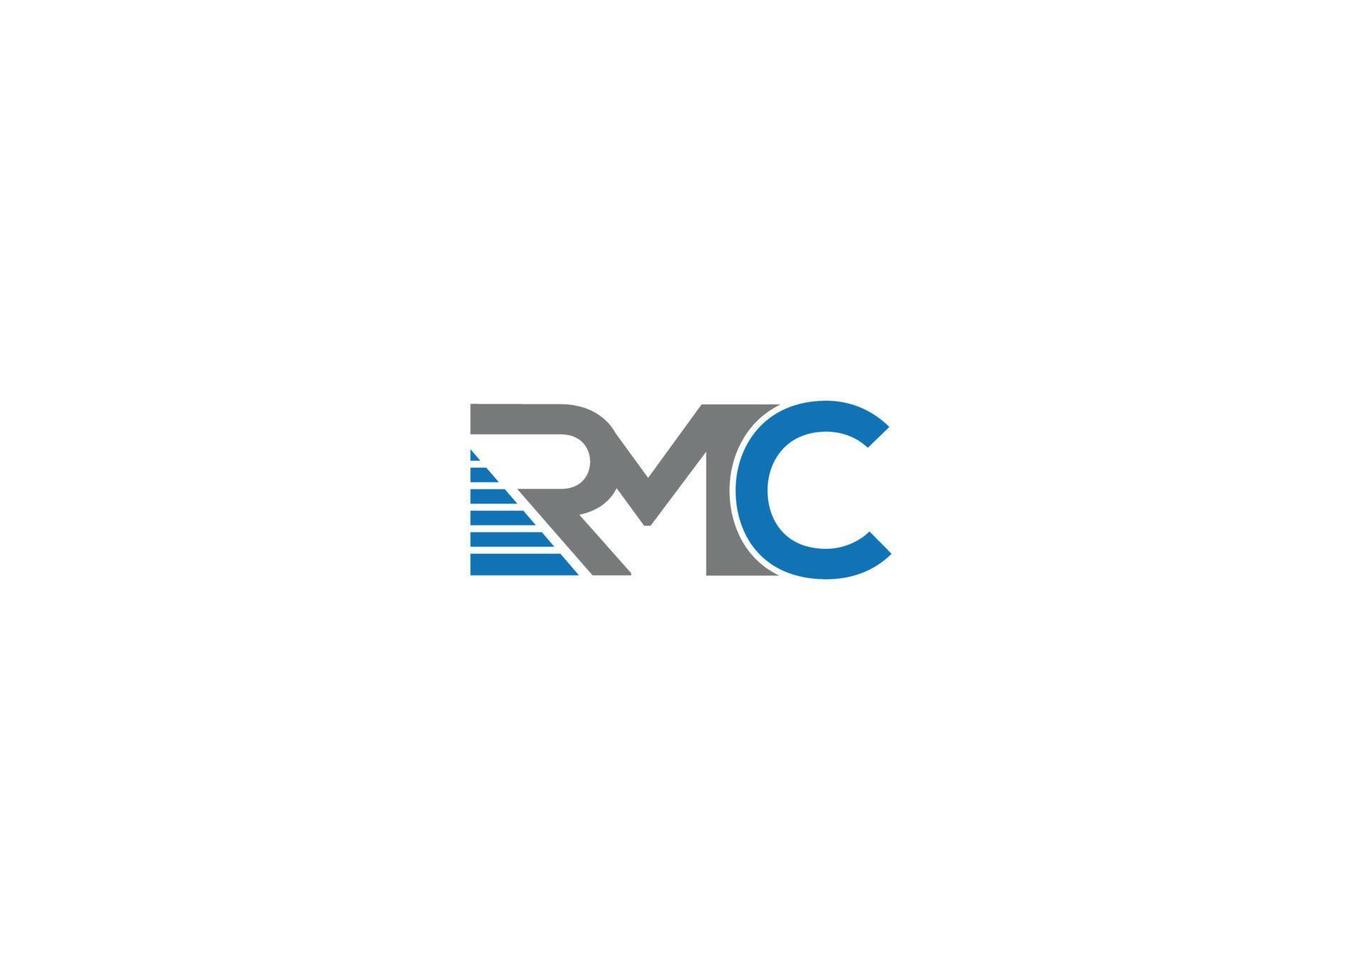 RMC letter Logo Design with Creative Modern vector icon emblem